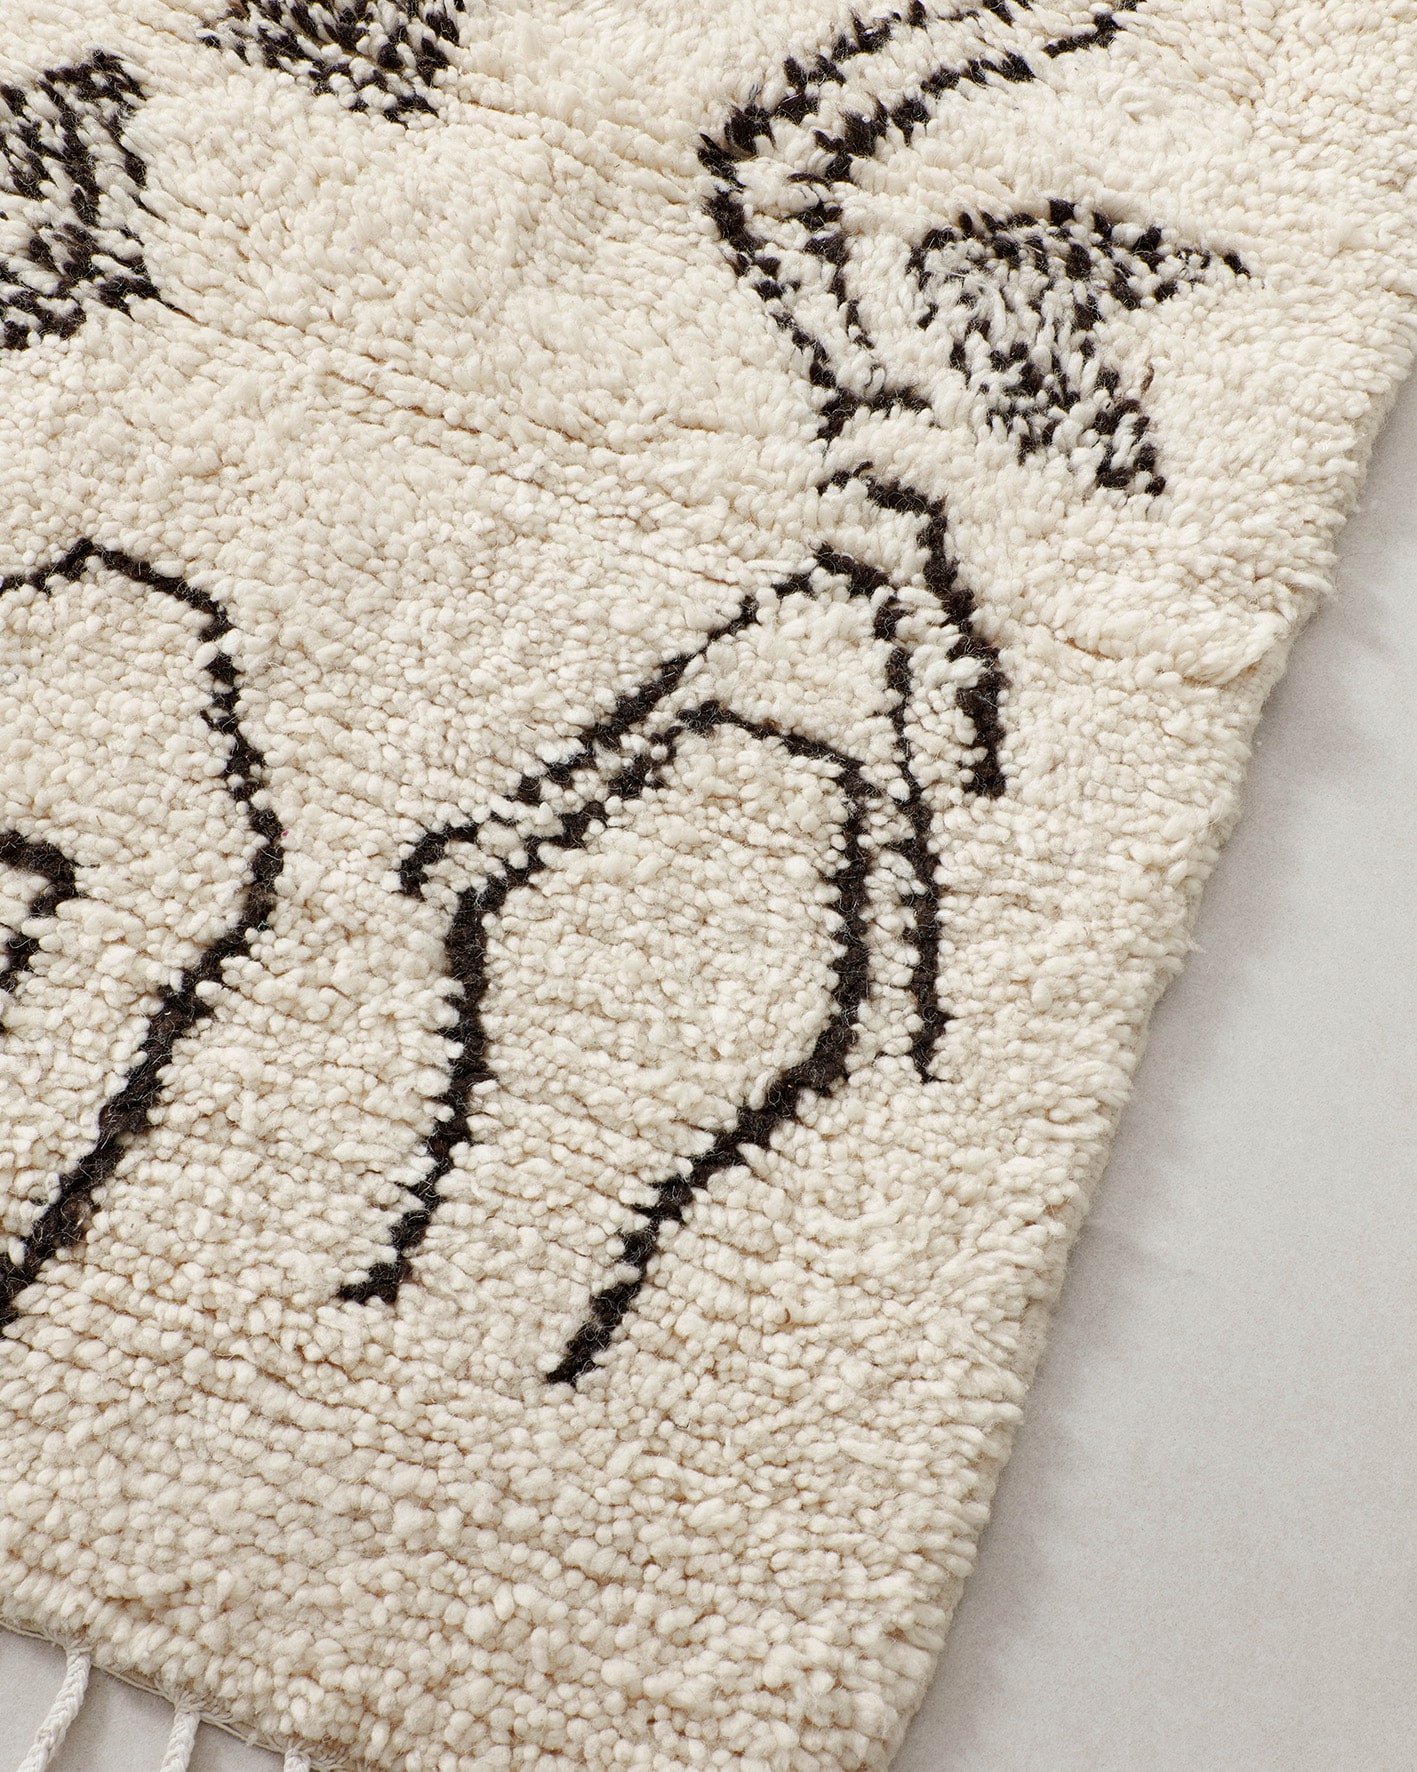 Tiny rug with abstract line drawings, close